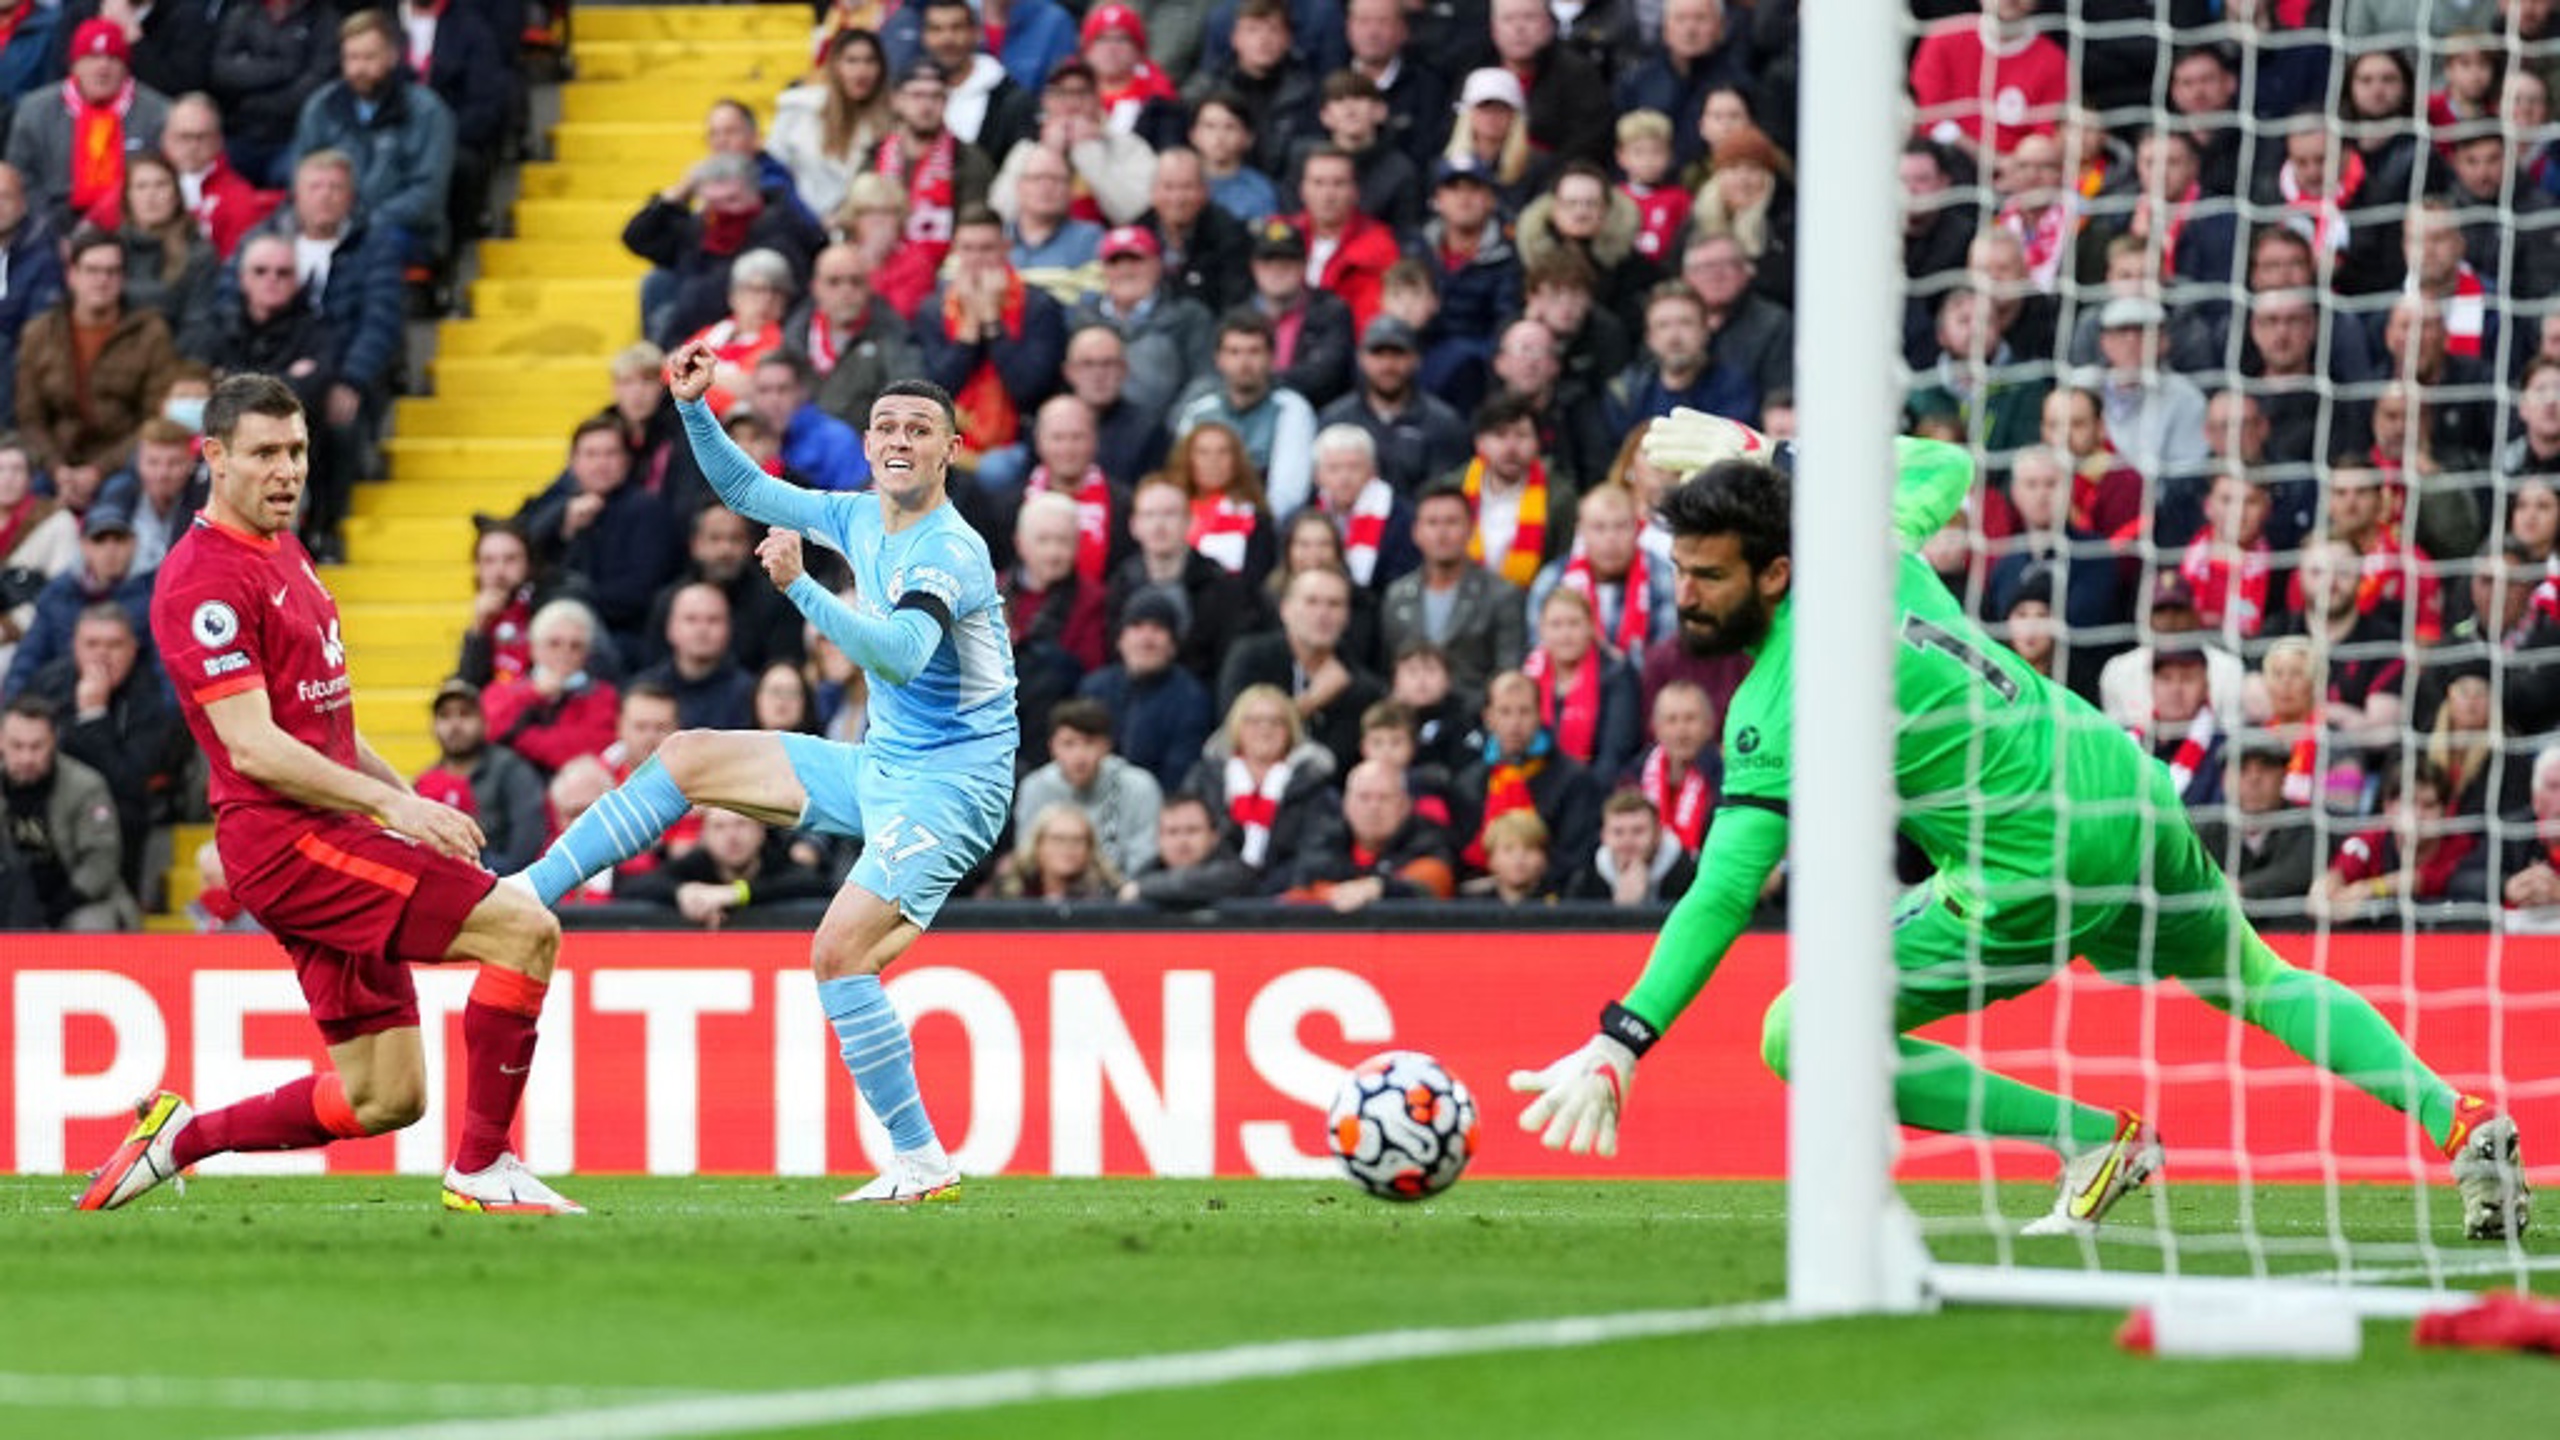 Gallery: City earn point in pulsating Liverpool clash